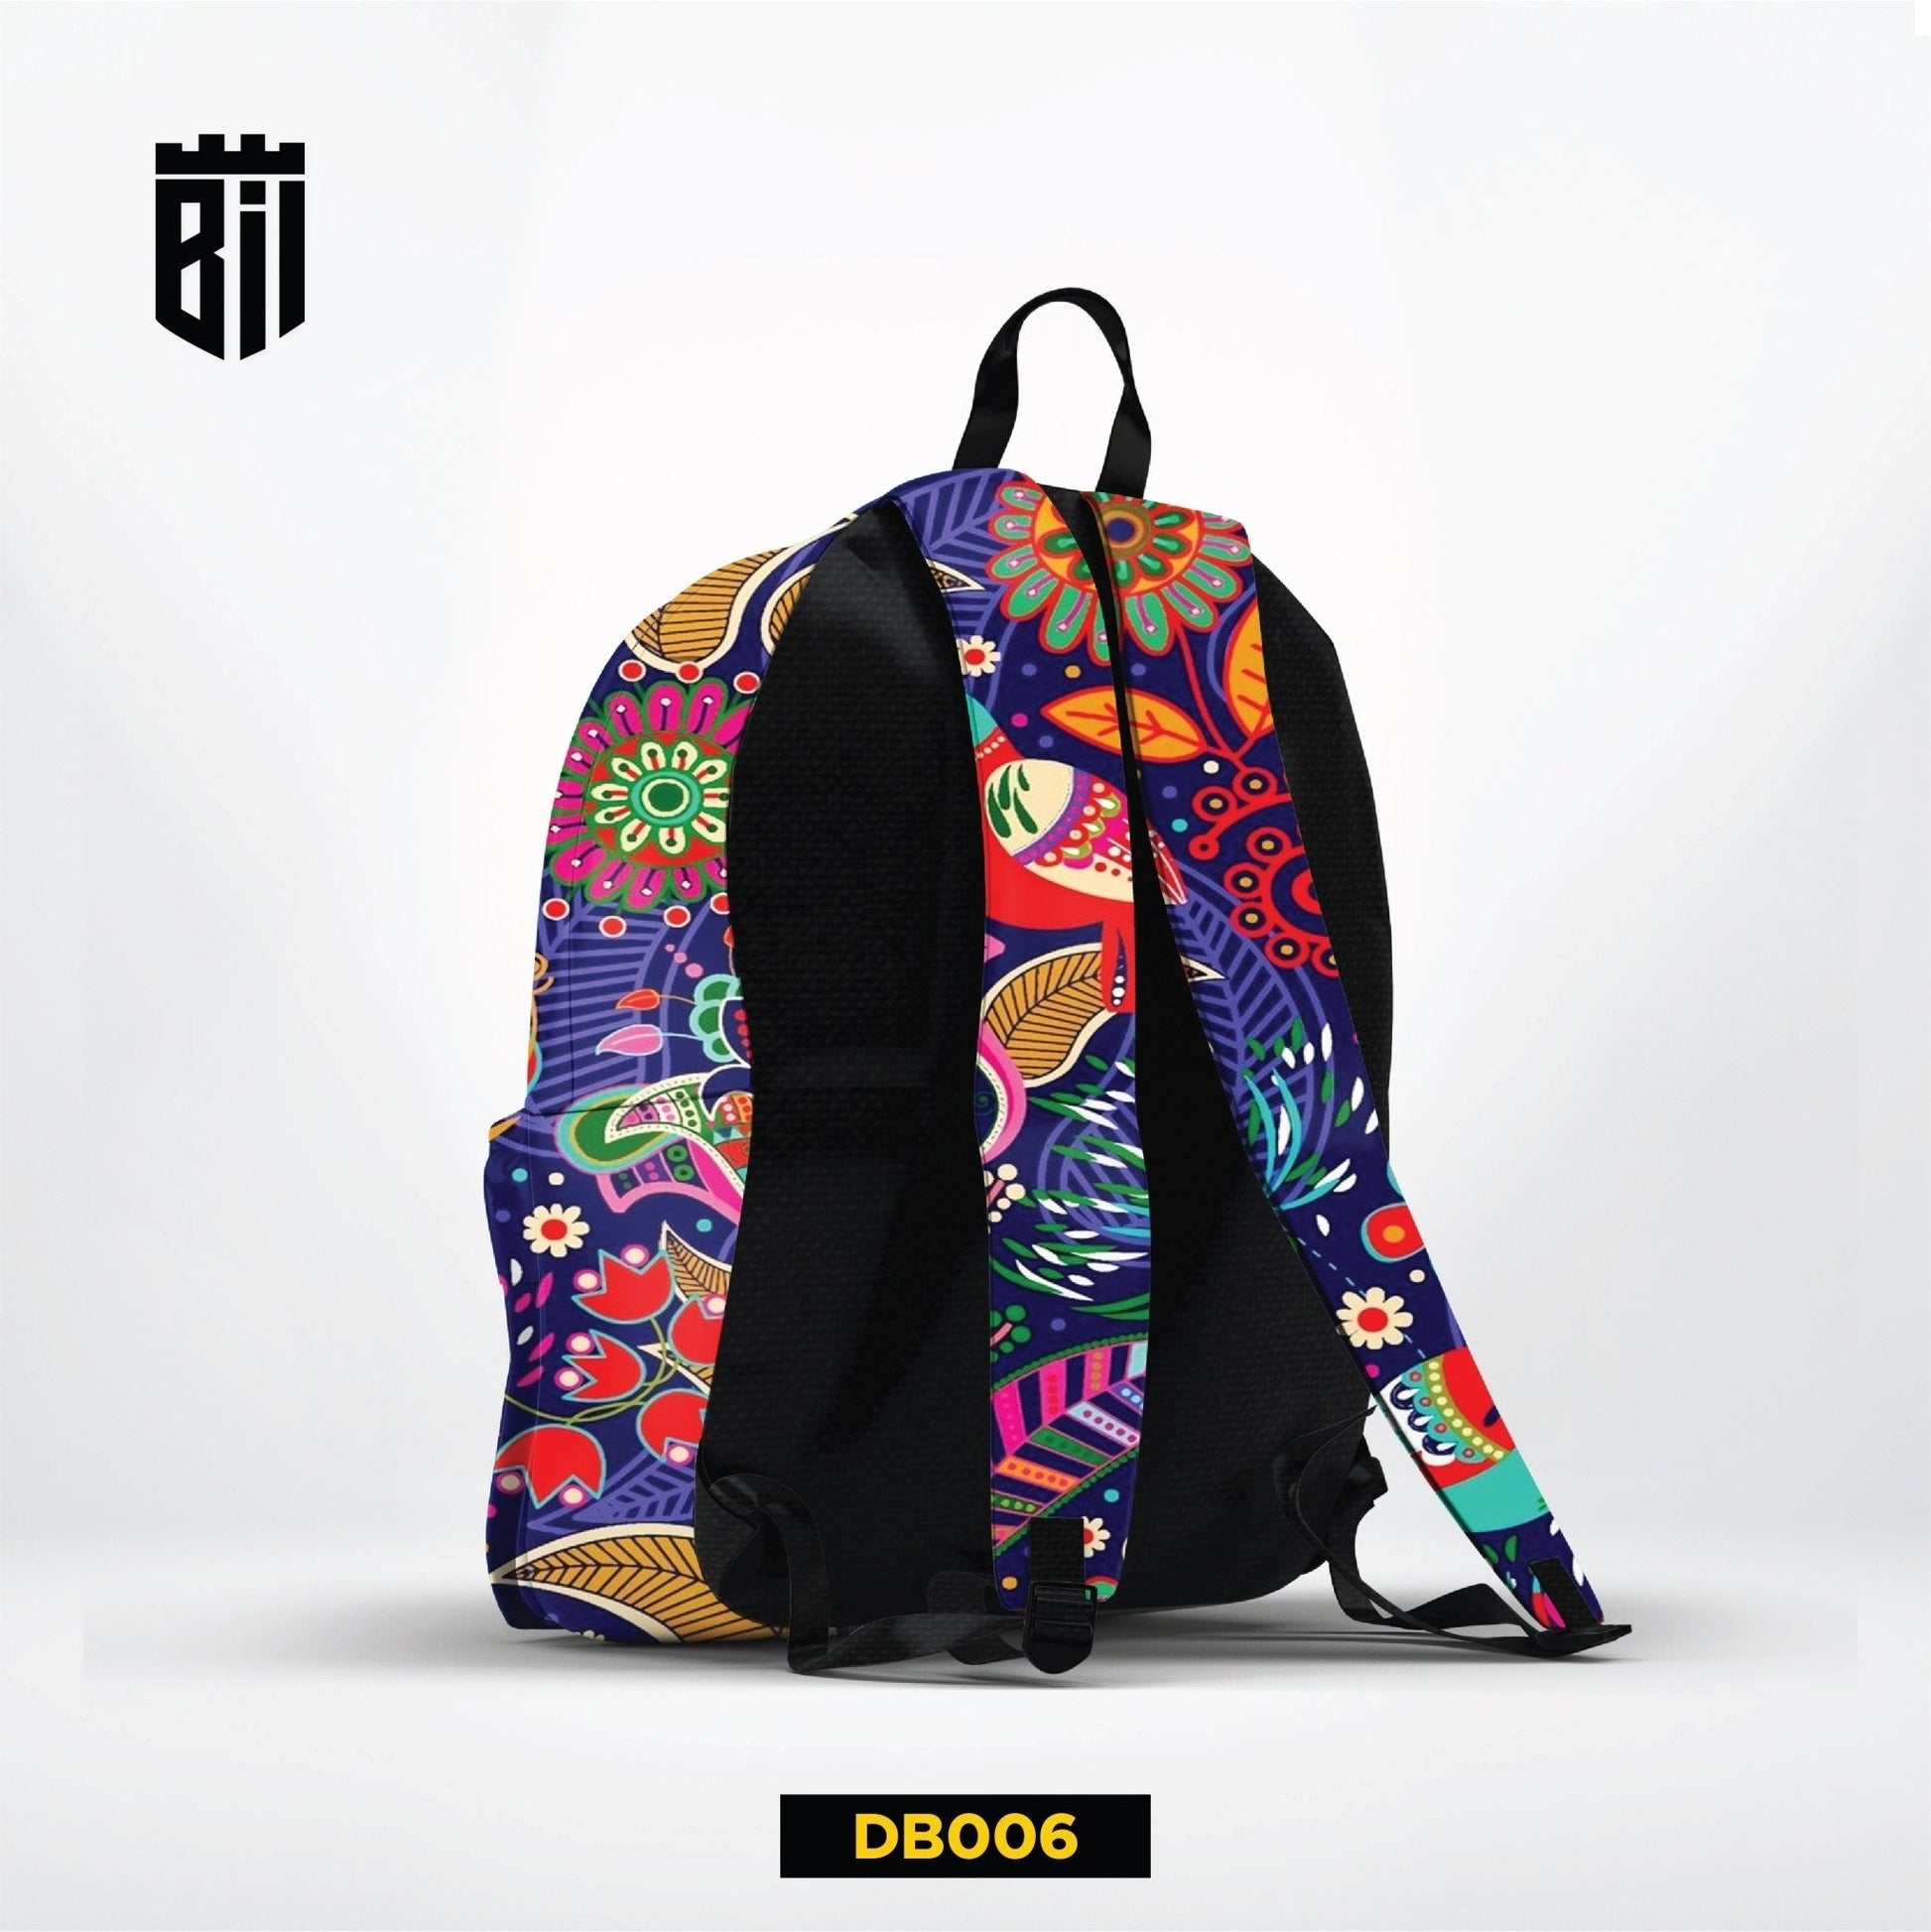 DB006 Floral Art Allover Printed Backpack - BREACHIT